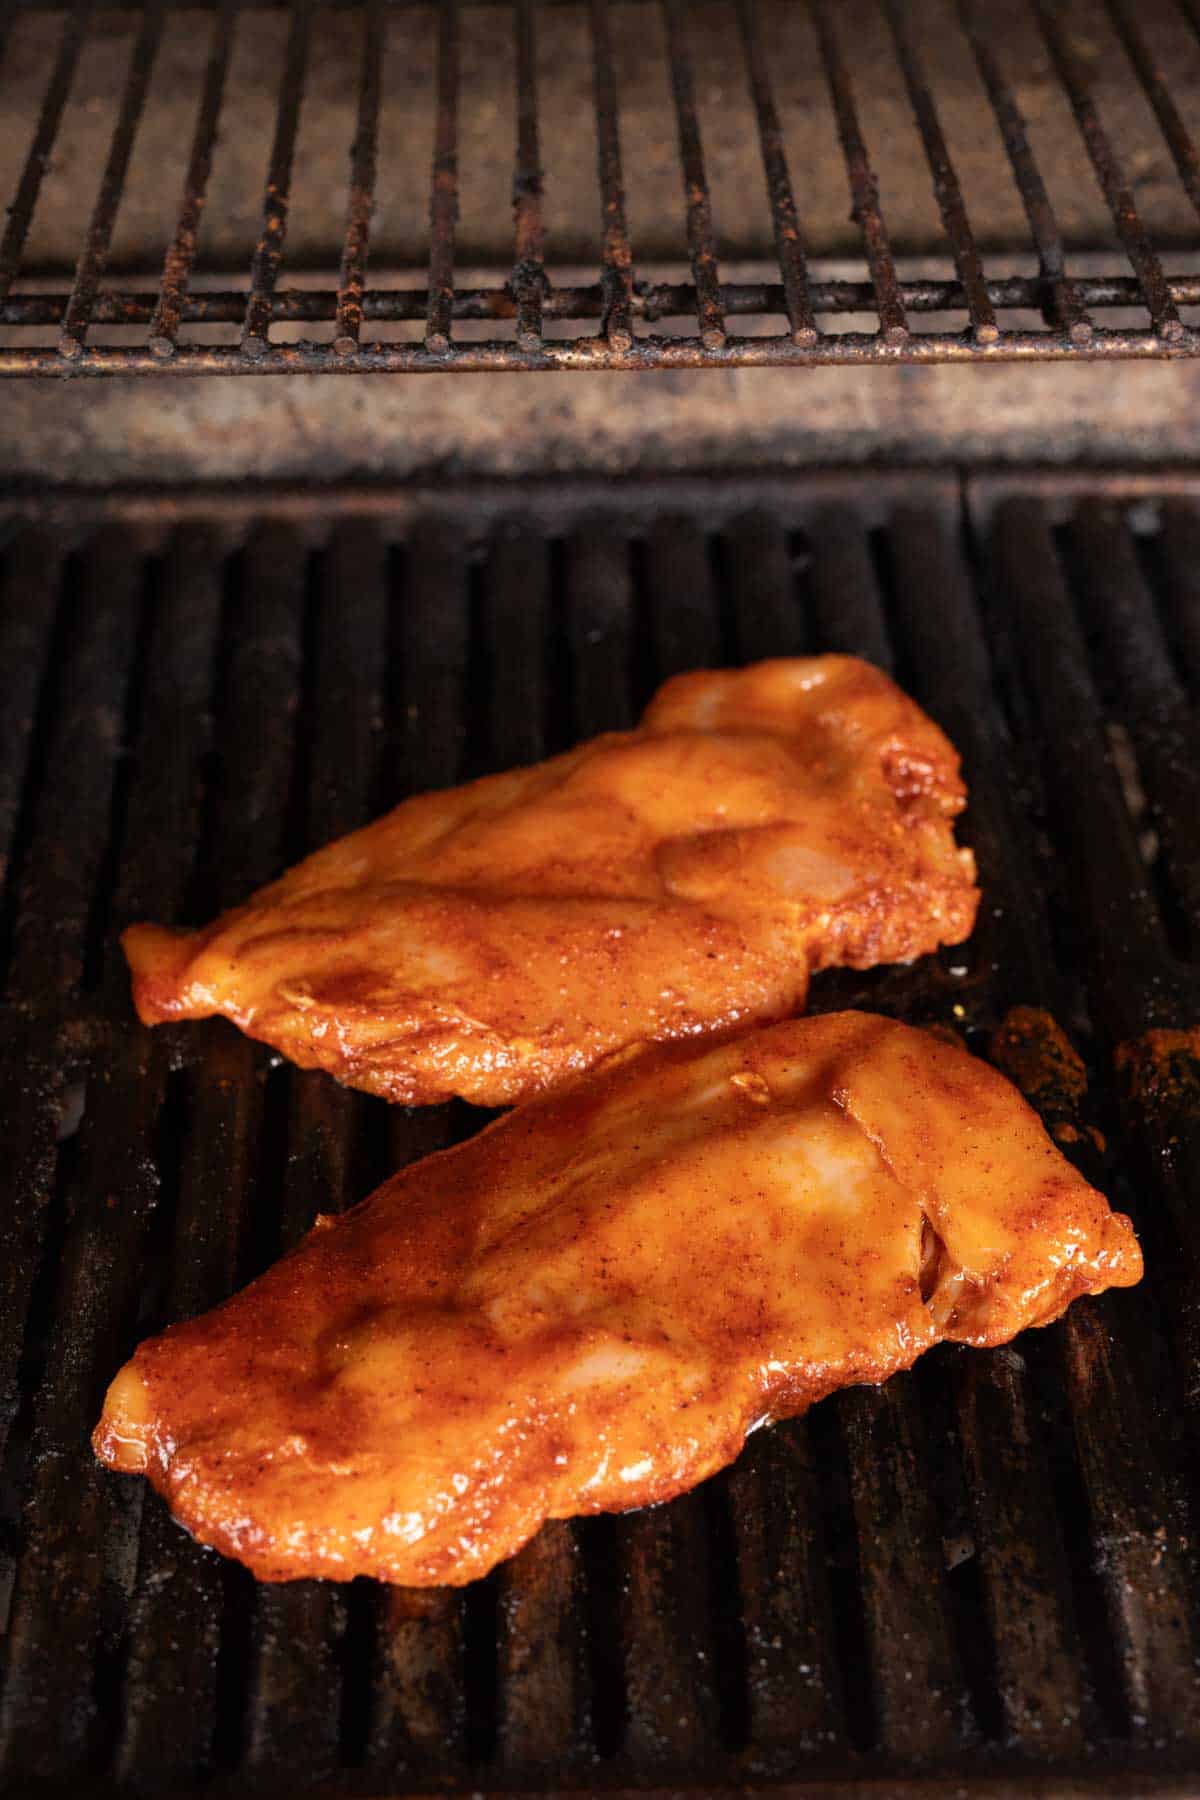 Marinated chicken breast on the grill